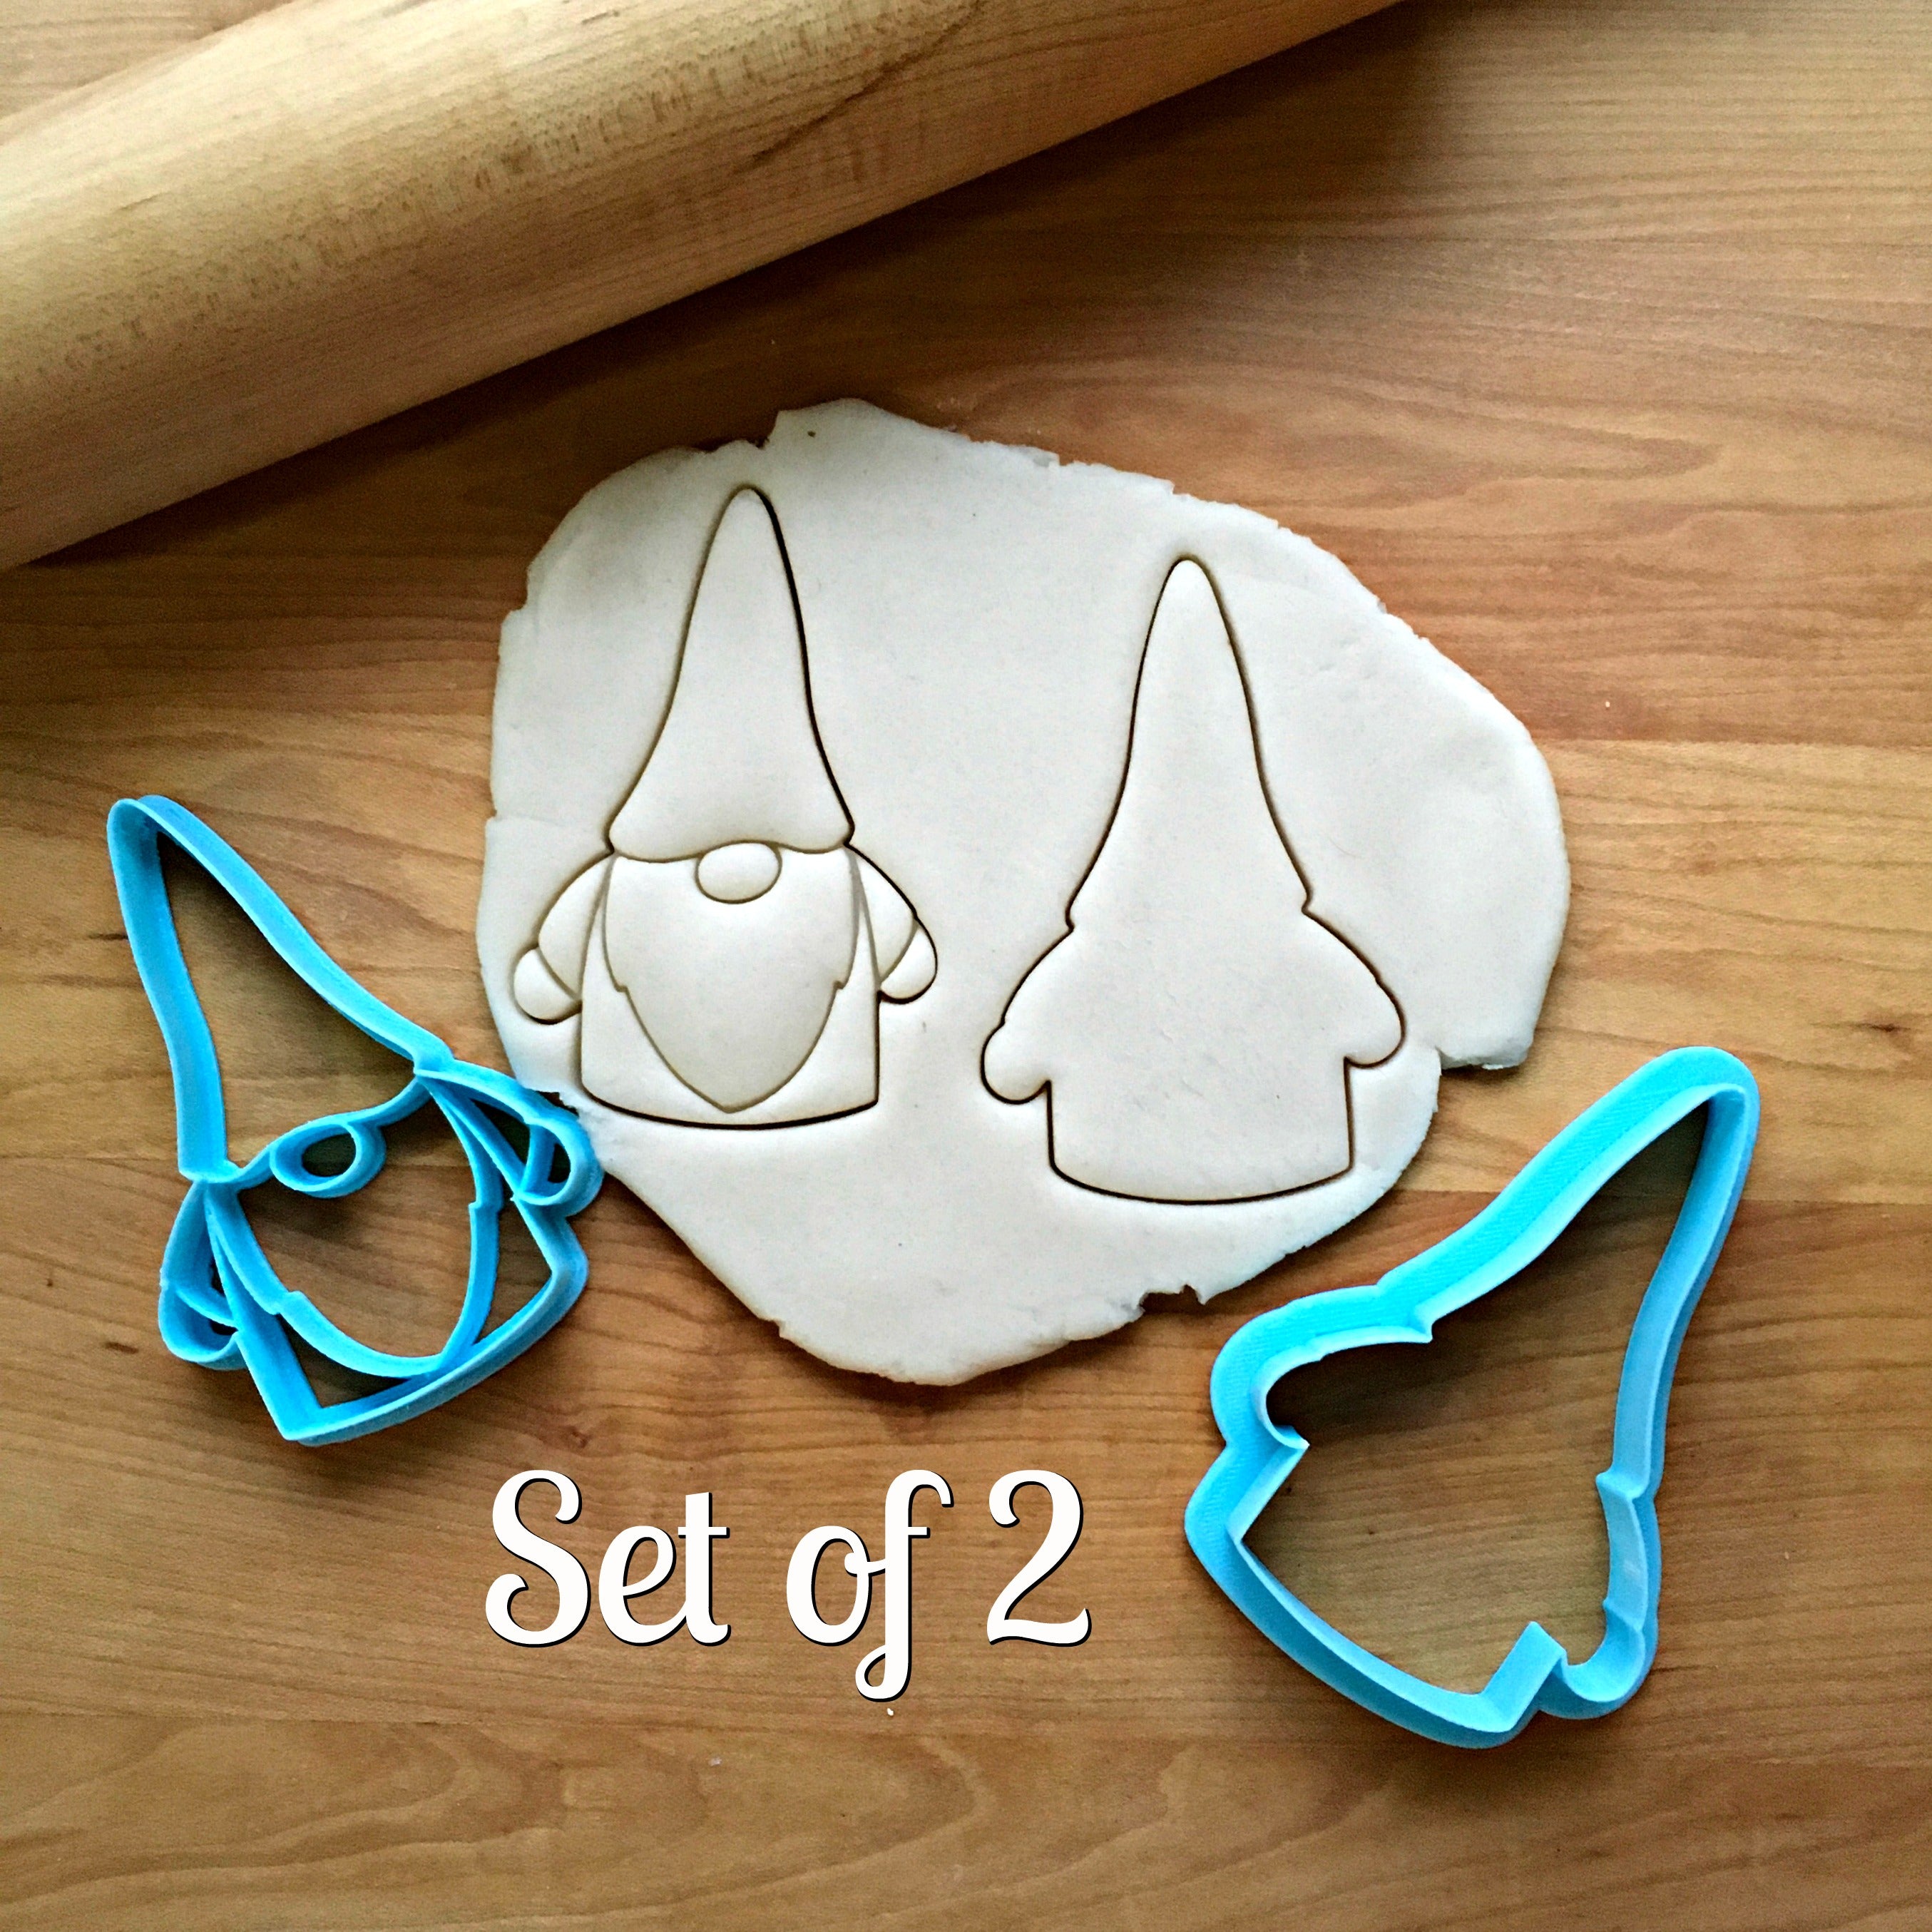 Set of 2 Gnome Cookie Cutters/Dishwasher Safe